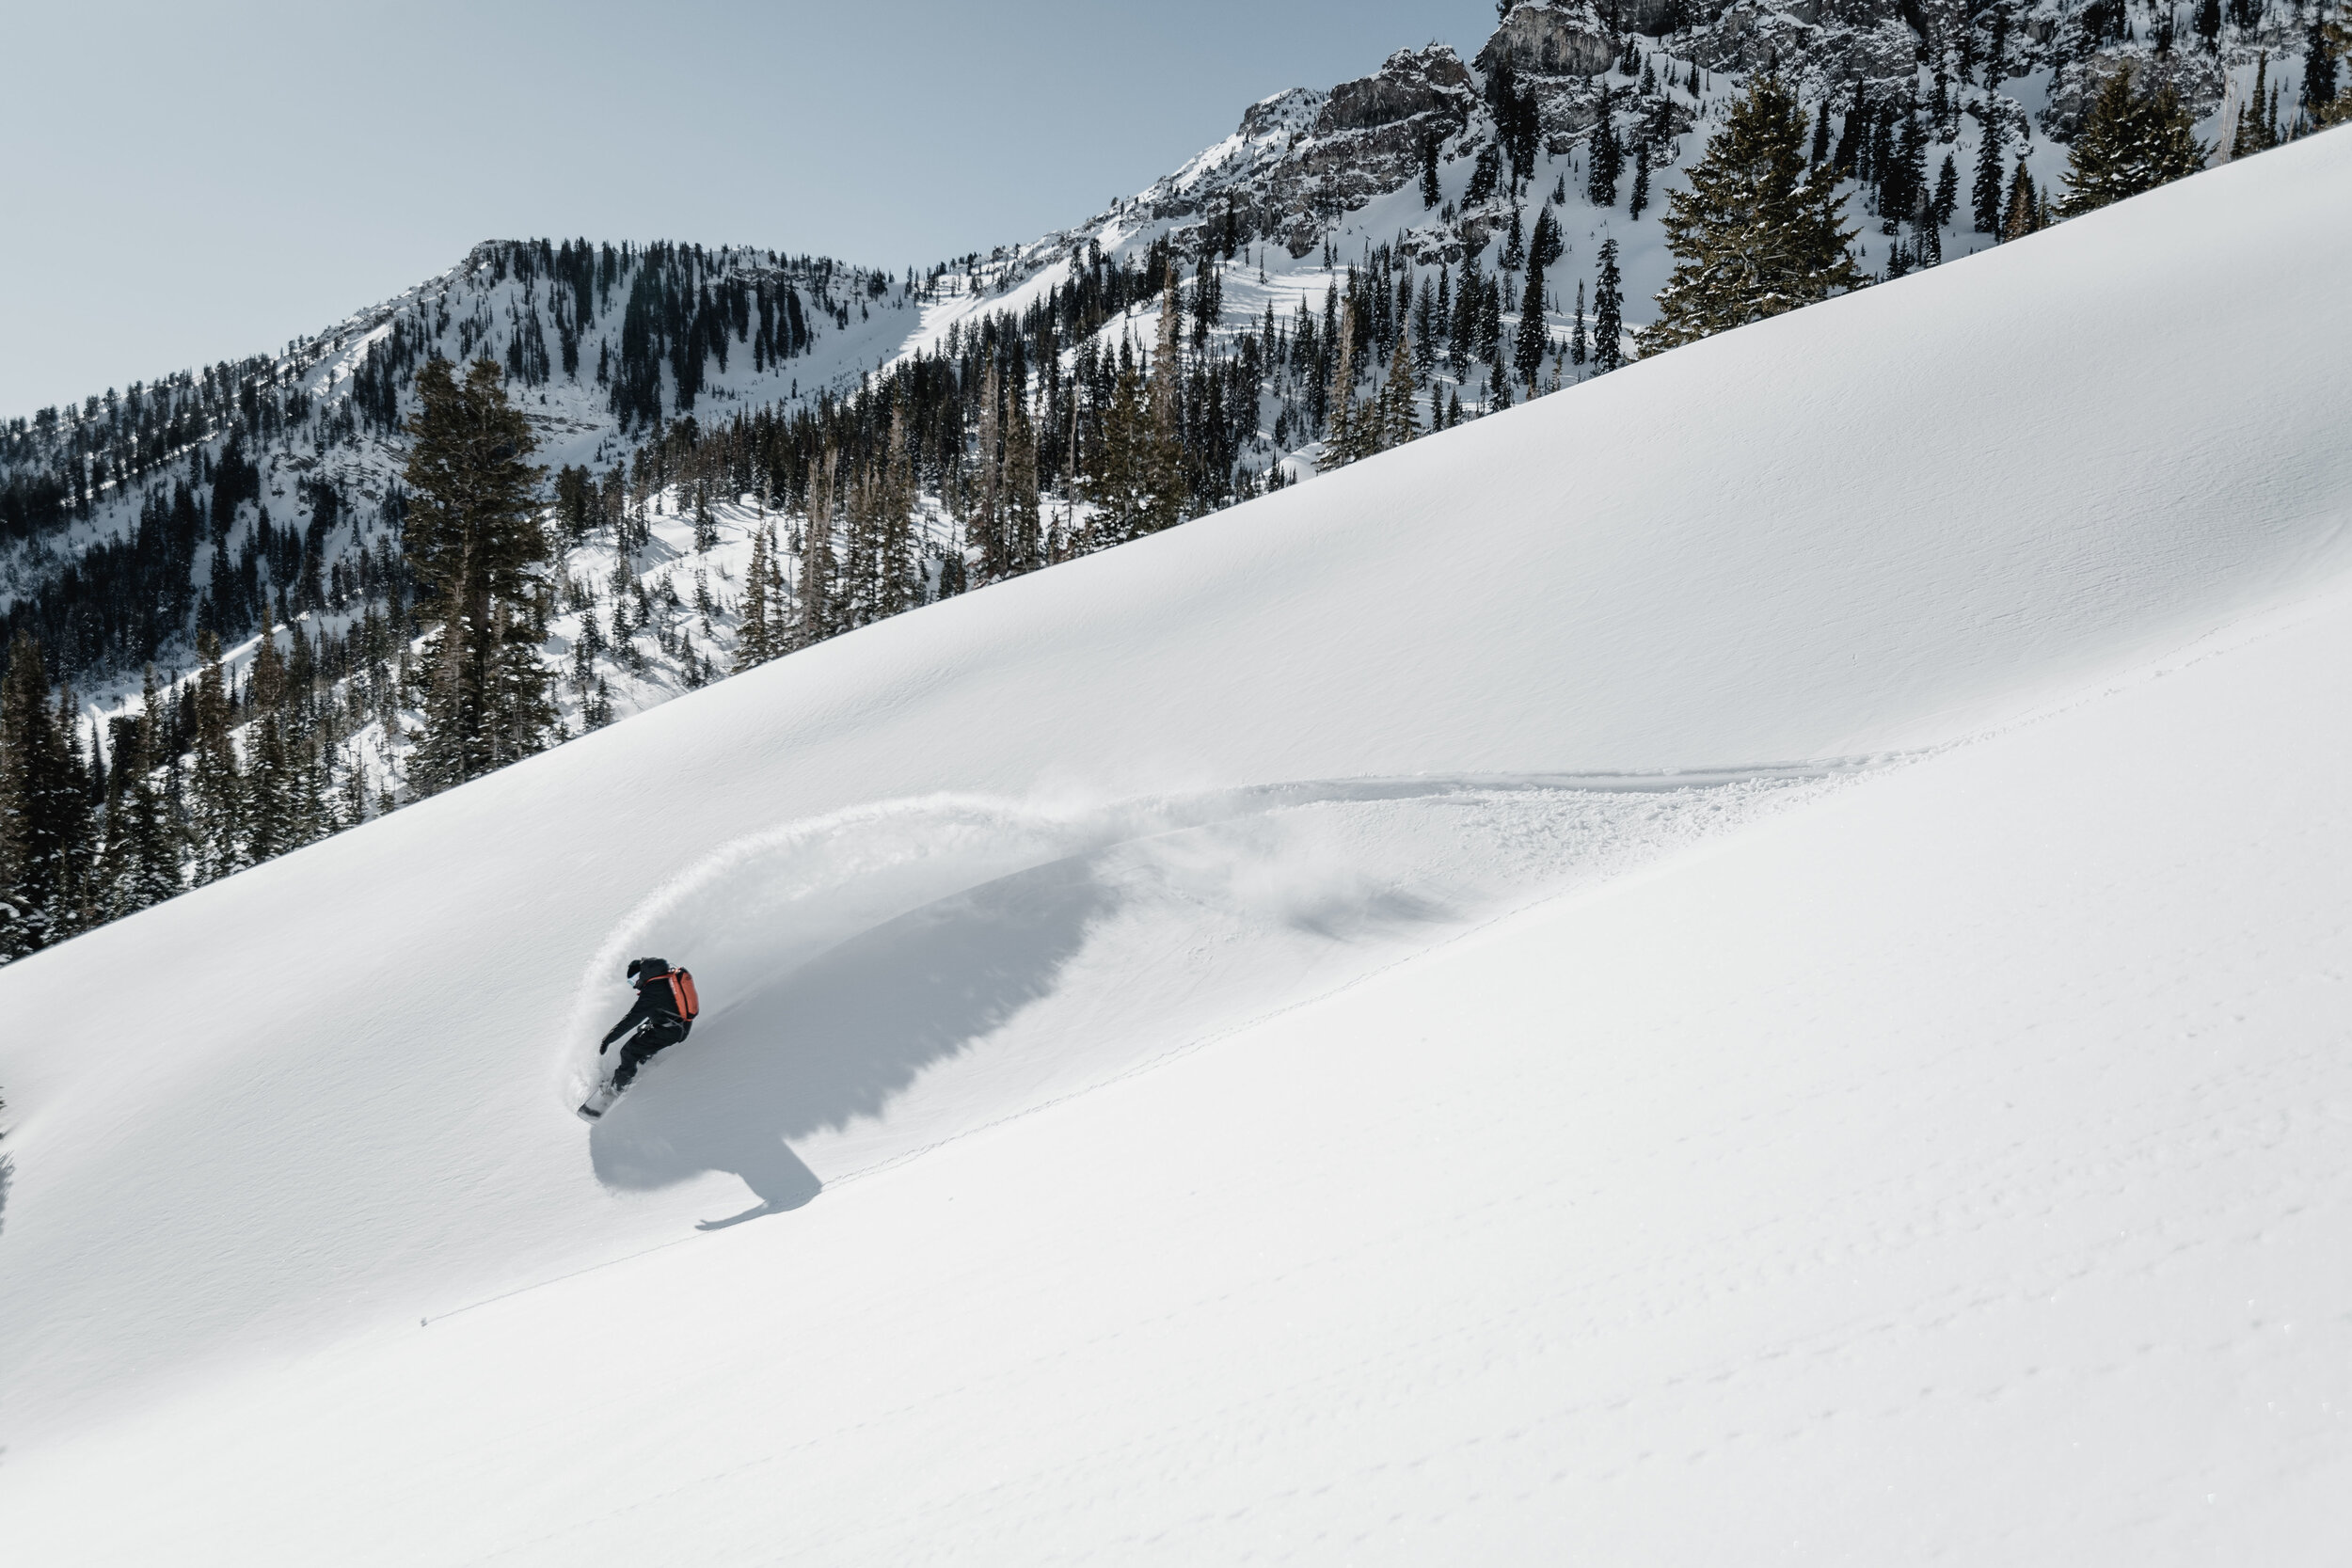   Backcountry Gear &amp; Apparel Winter ’19    Pursuits:  Helicopter Skiing, Backcountry Skiing, and Resort Skiing    Location : Little Cottonwood Canyon, UT    Producer : Tyler Arrivillaga   Photographers : Re Wikstrom &amp; Ben Christensen 